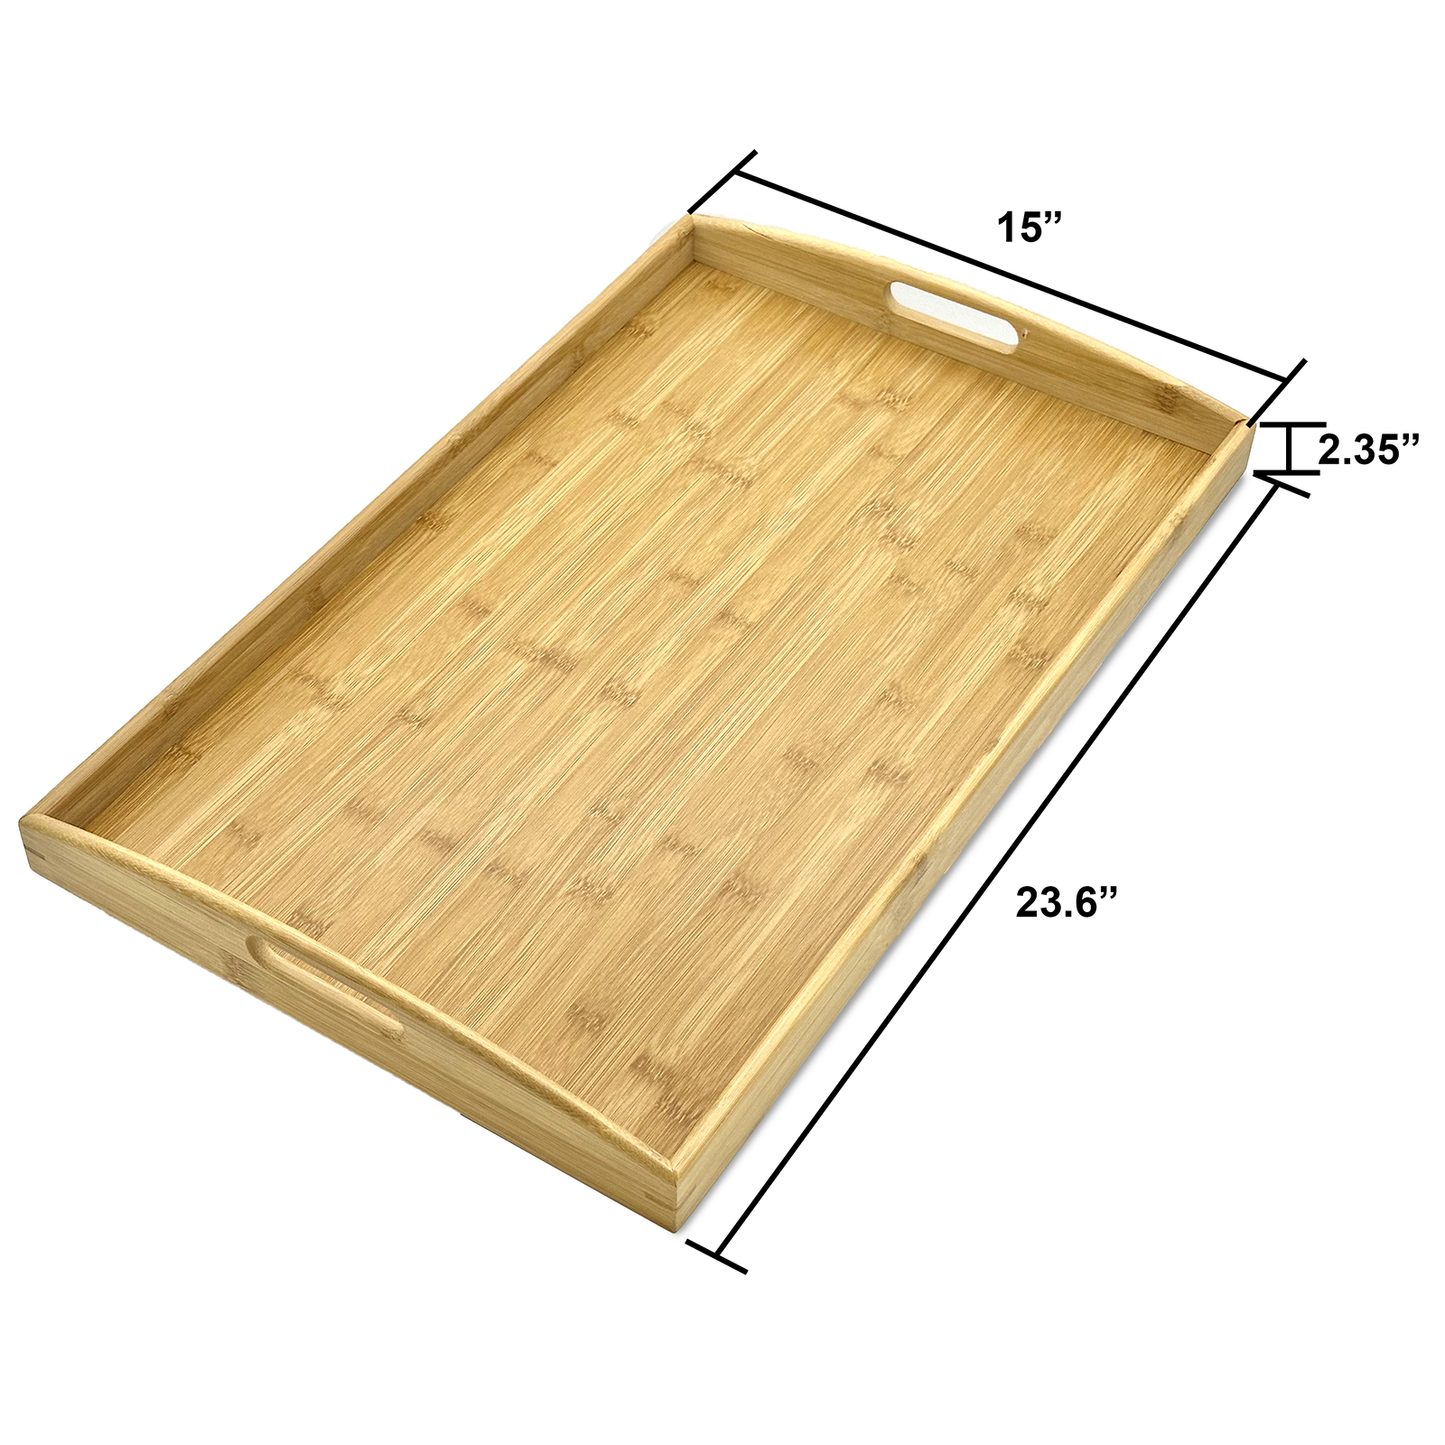 24" x 15" Bam & Boo Natural Bamboo Large Serving Tray with Handles